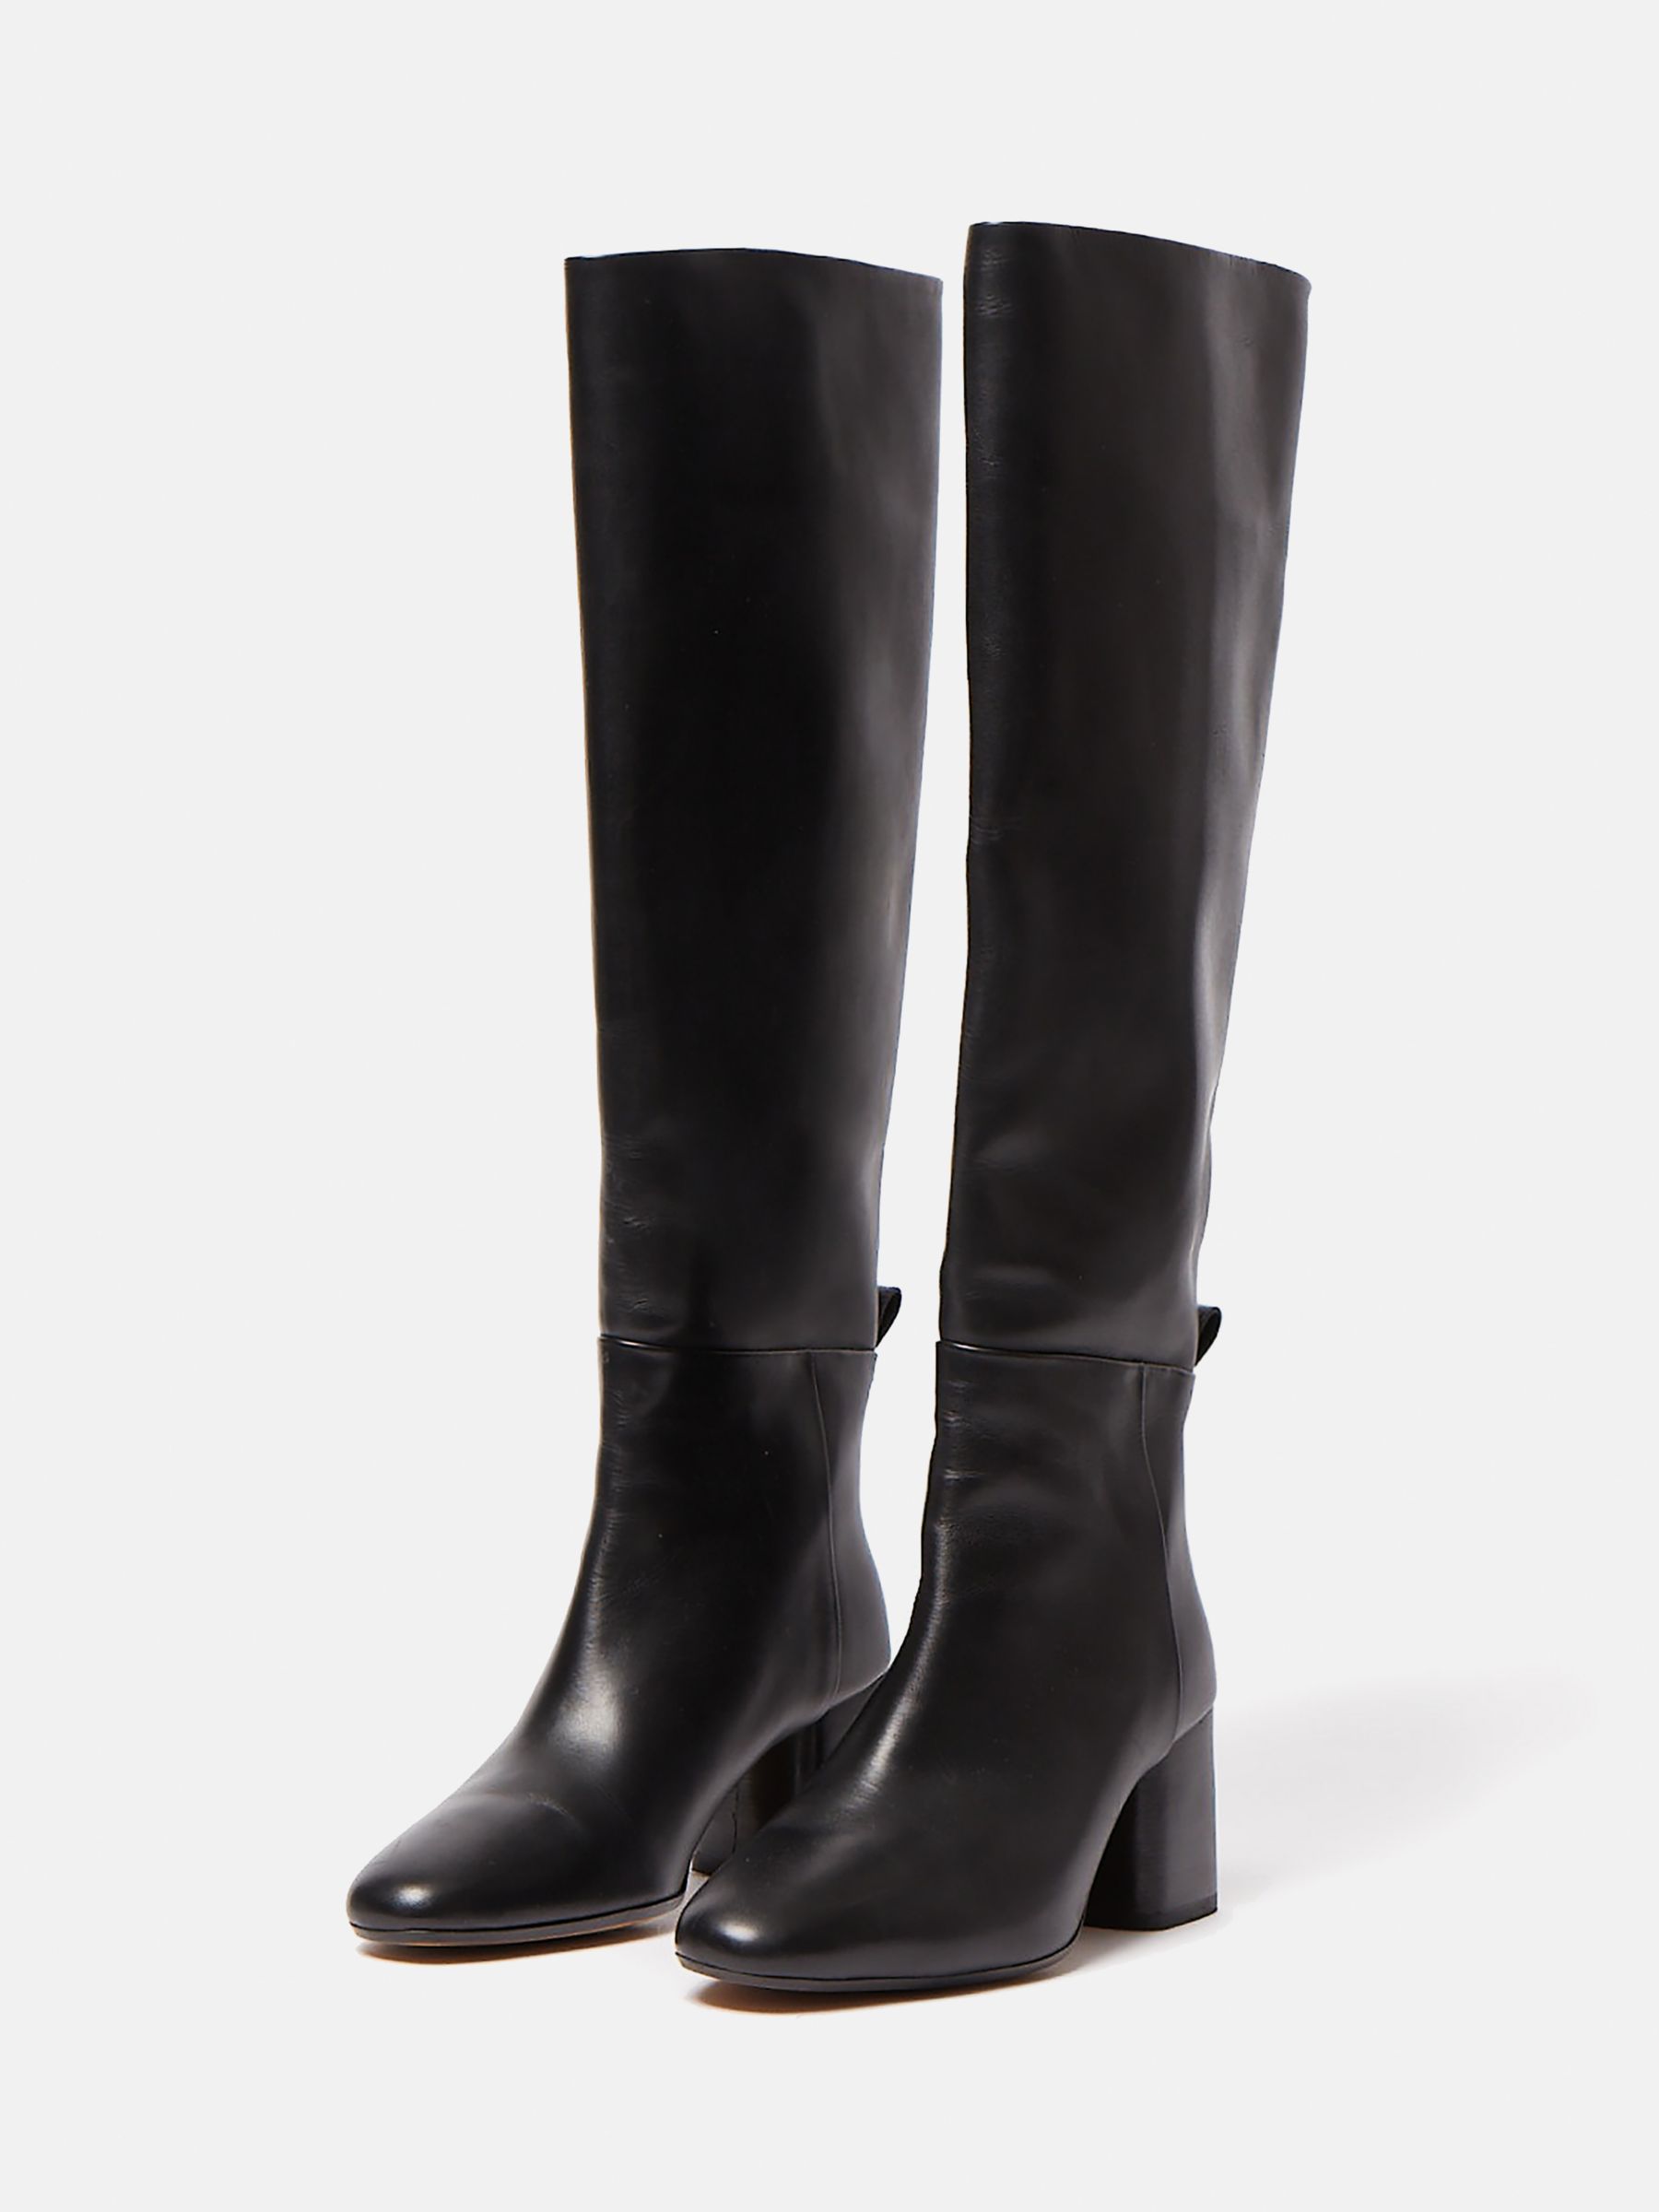 Jigsaw Heeled Leather Riding Boots, Black at John Lewis & Partners